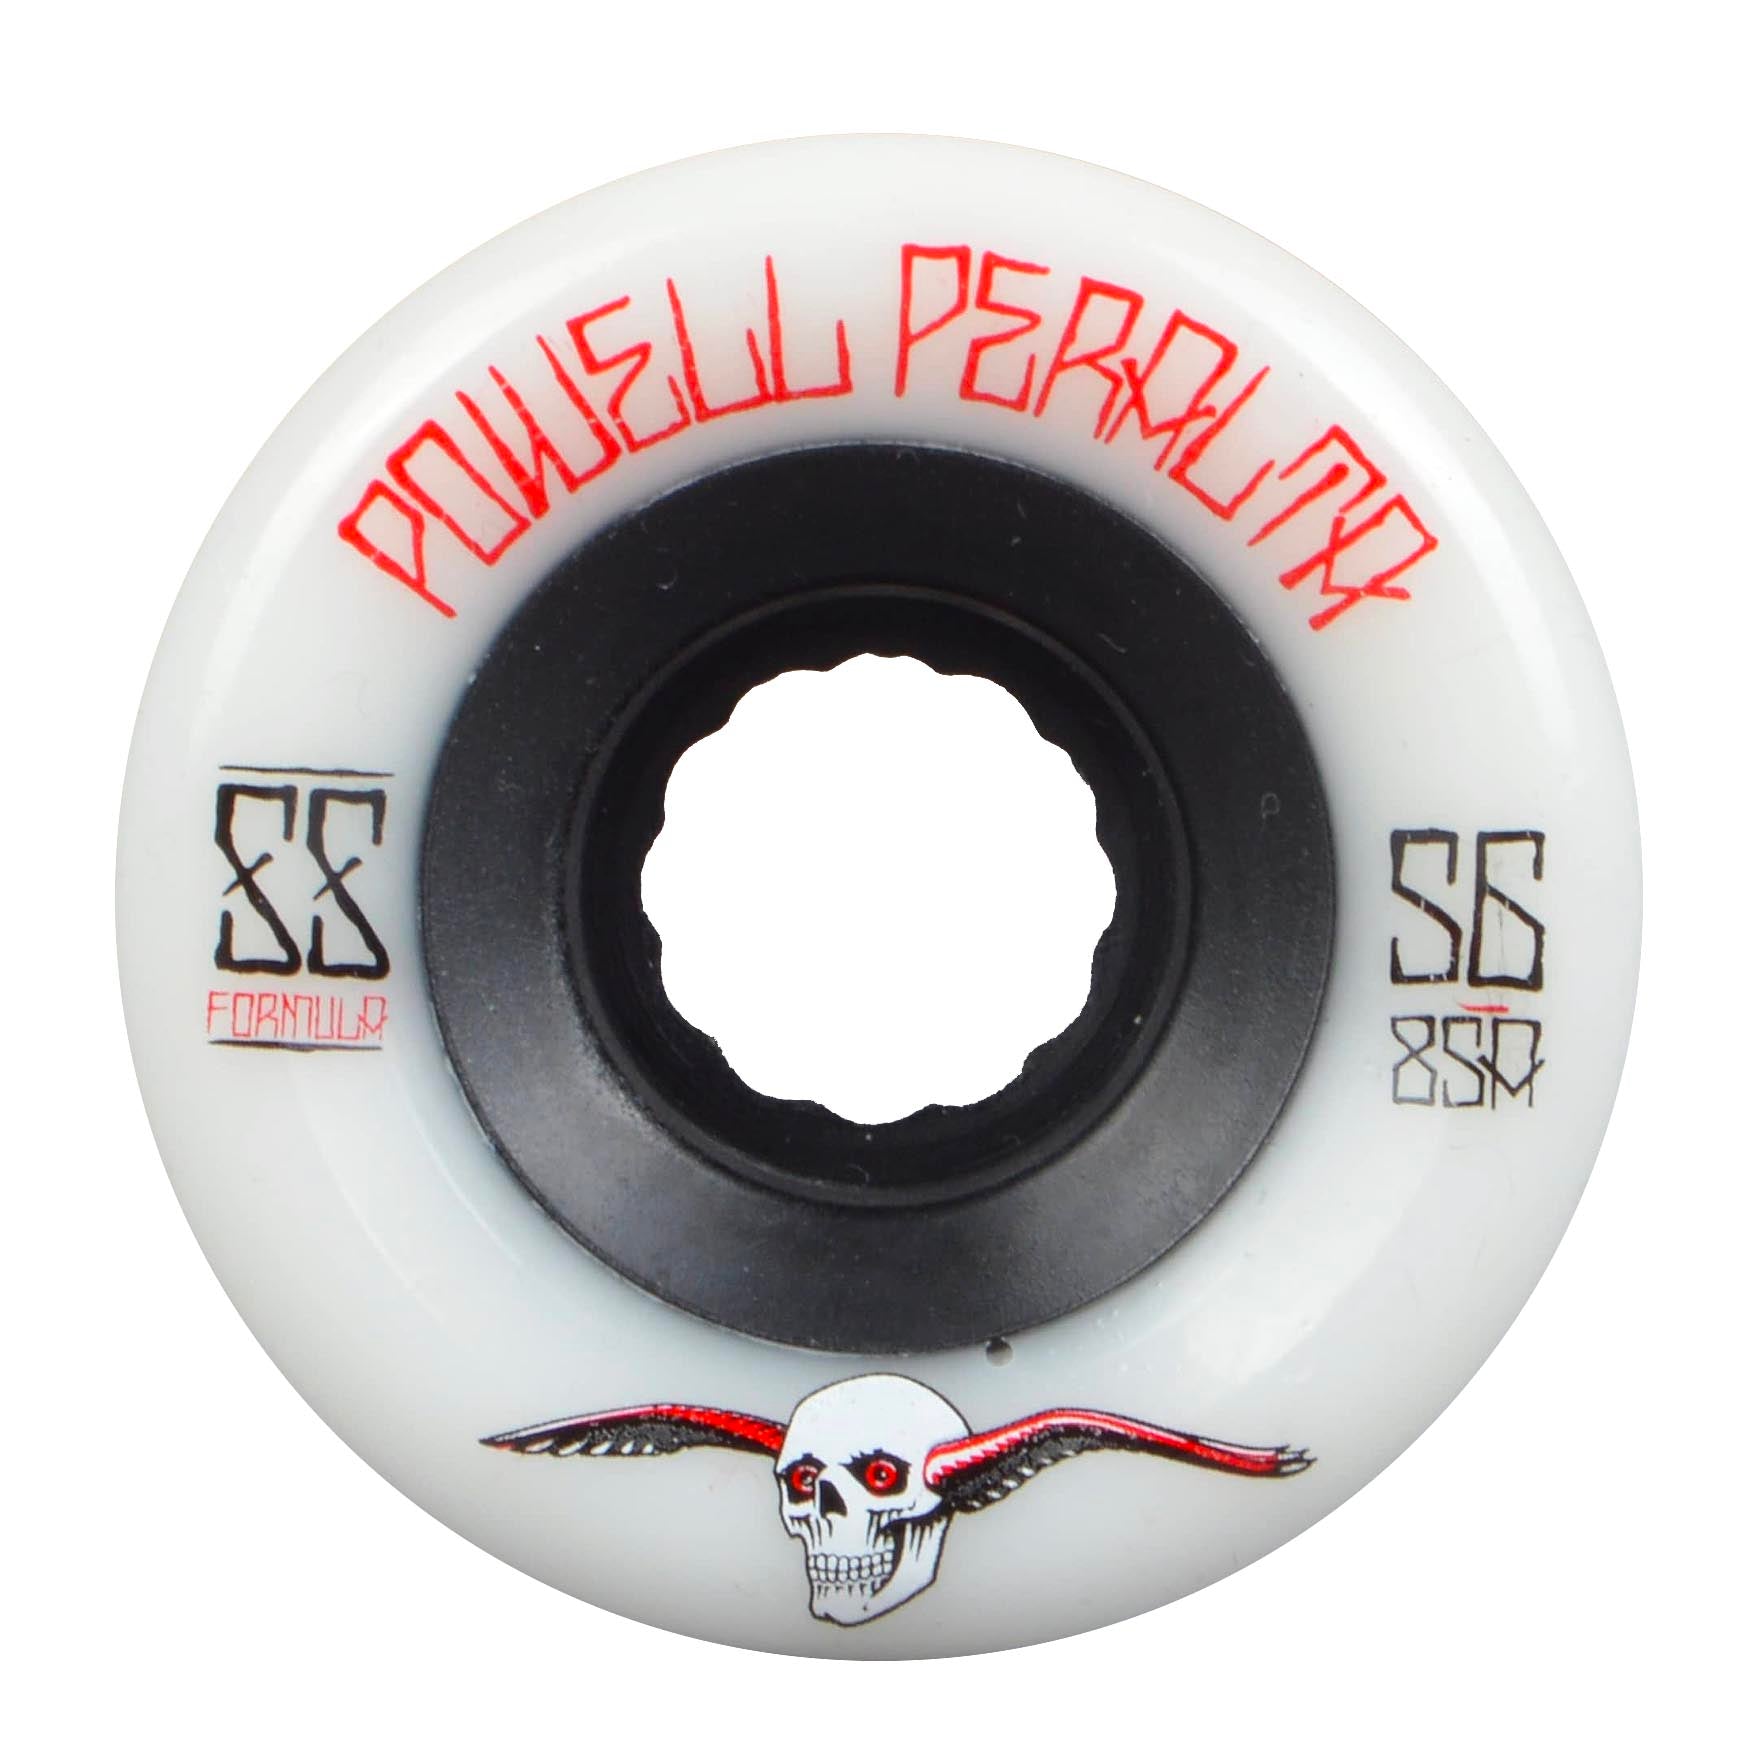 Powell Peralta - 56mm - G-Slides 85a SSF Wheels - White - Prime Delux Store